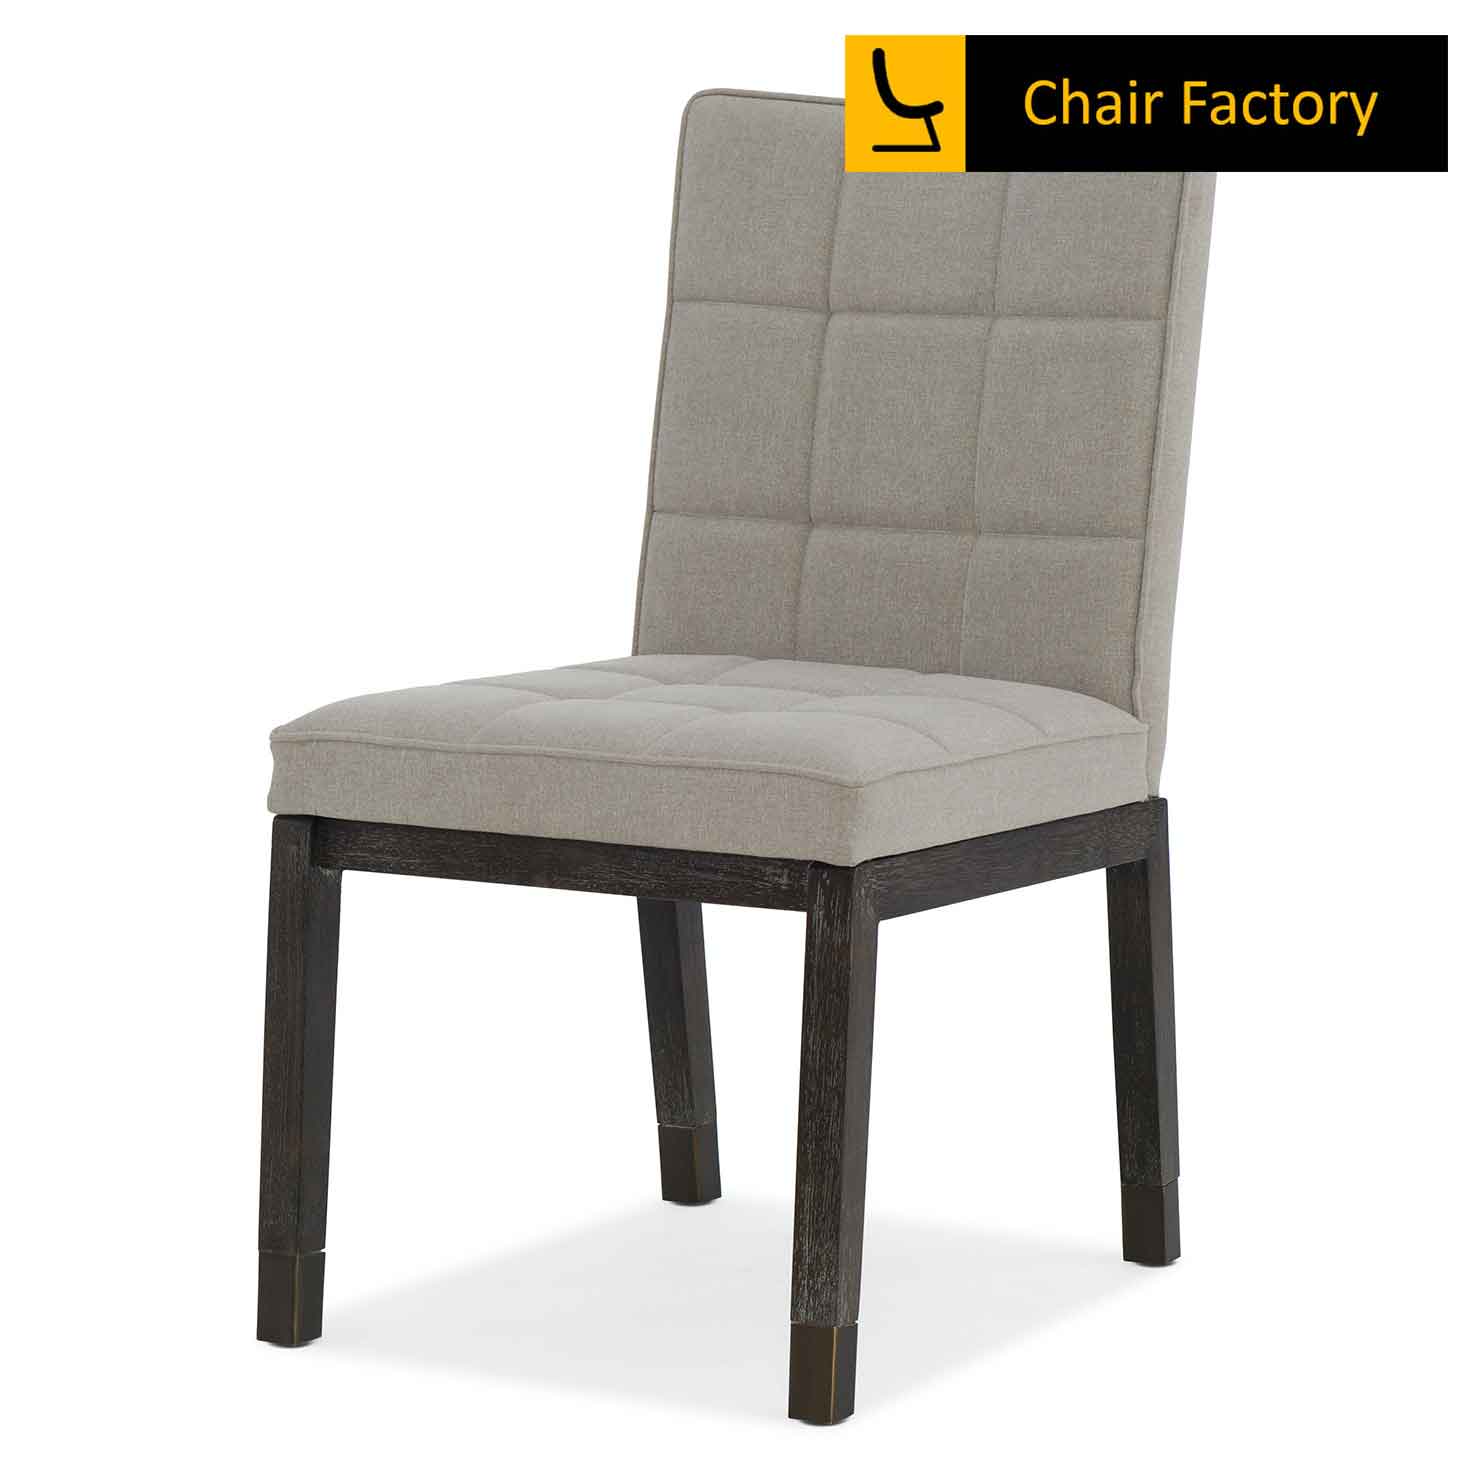 Beauford without Arms dining chair